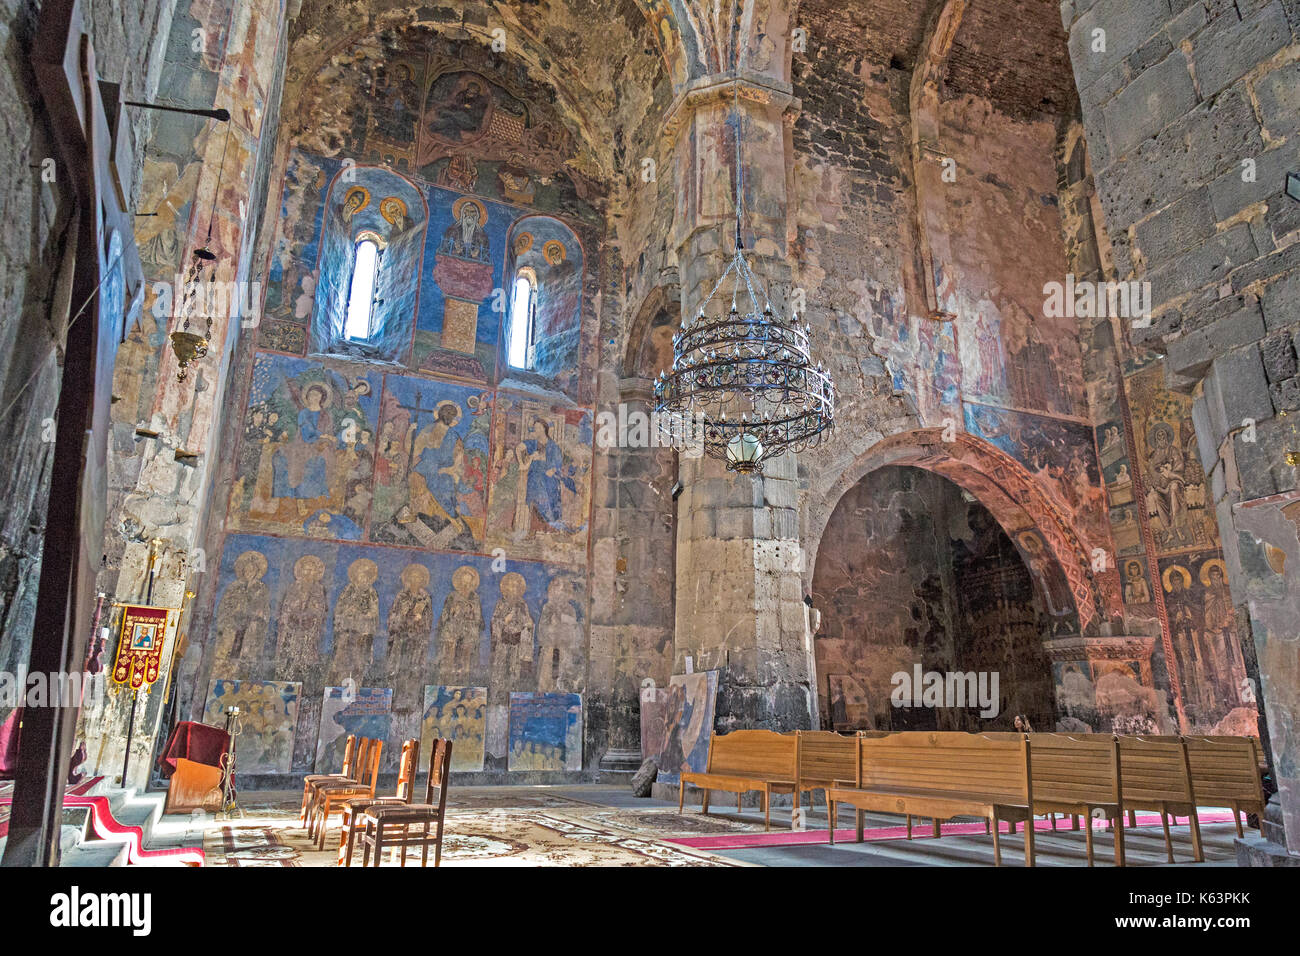 Inside the Akhtala Monastery in Armenia, showing paintings, icons, and the architecture of the building. Stock Photo